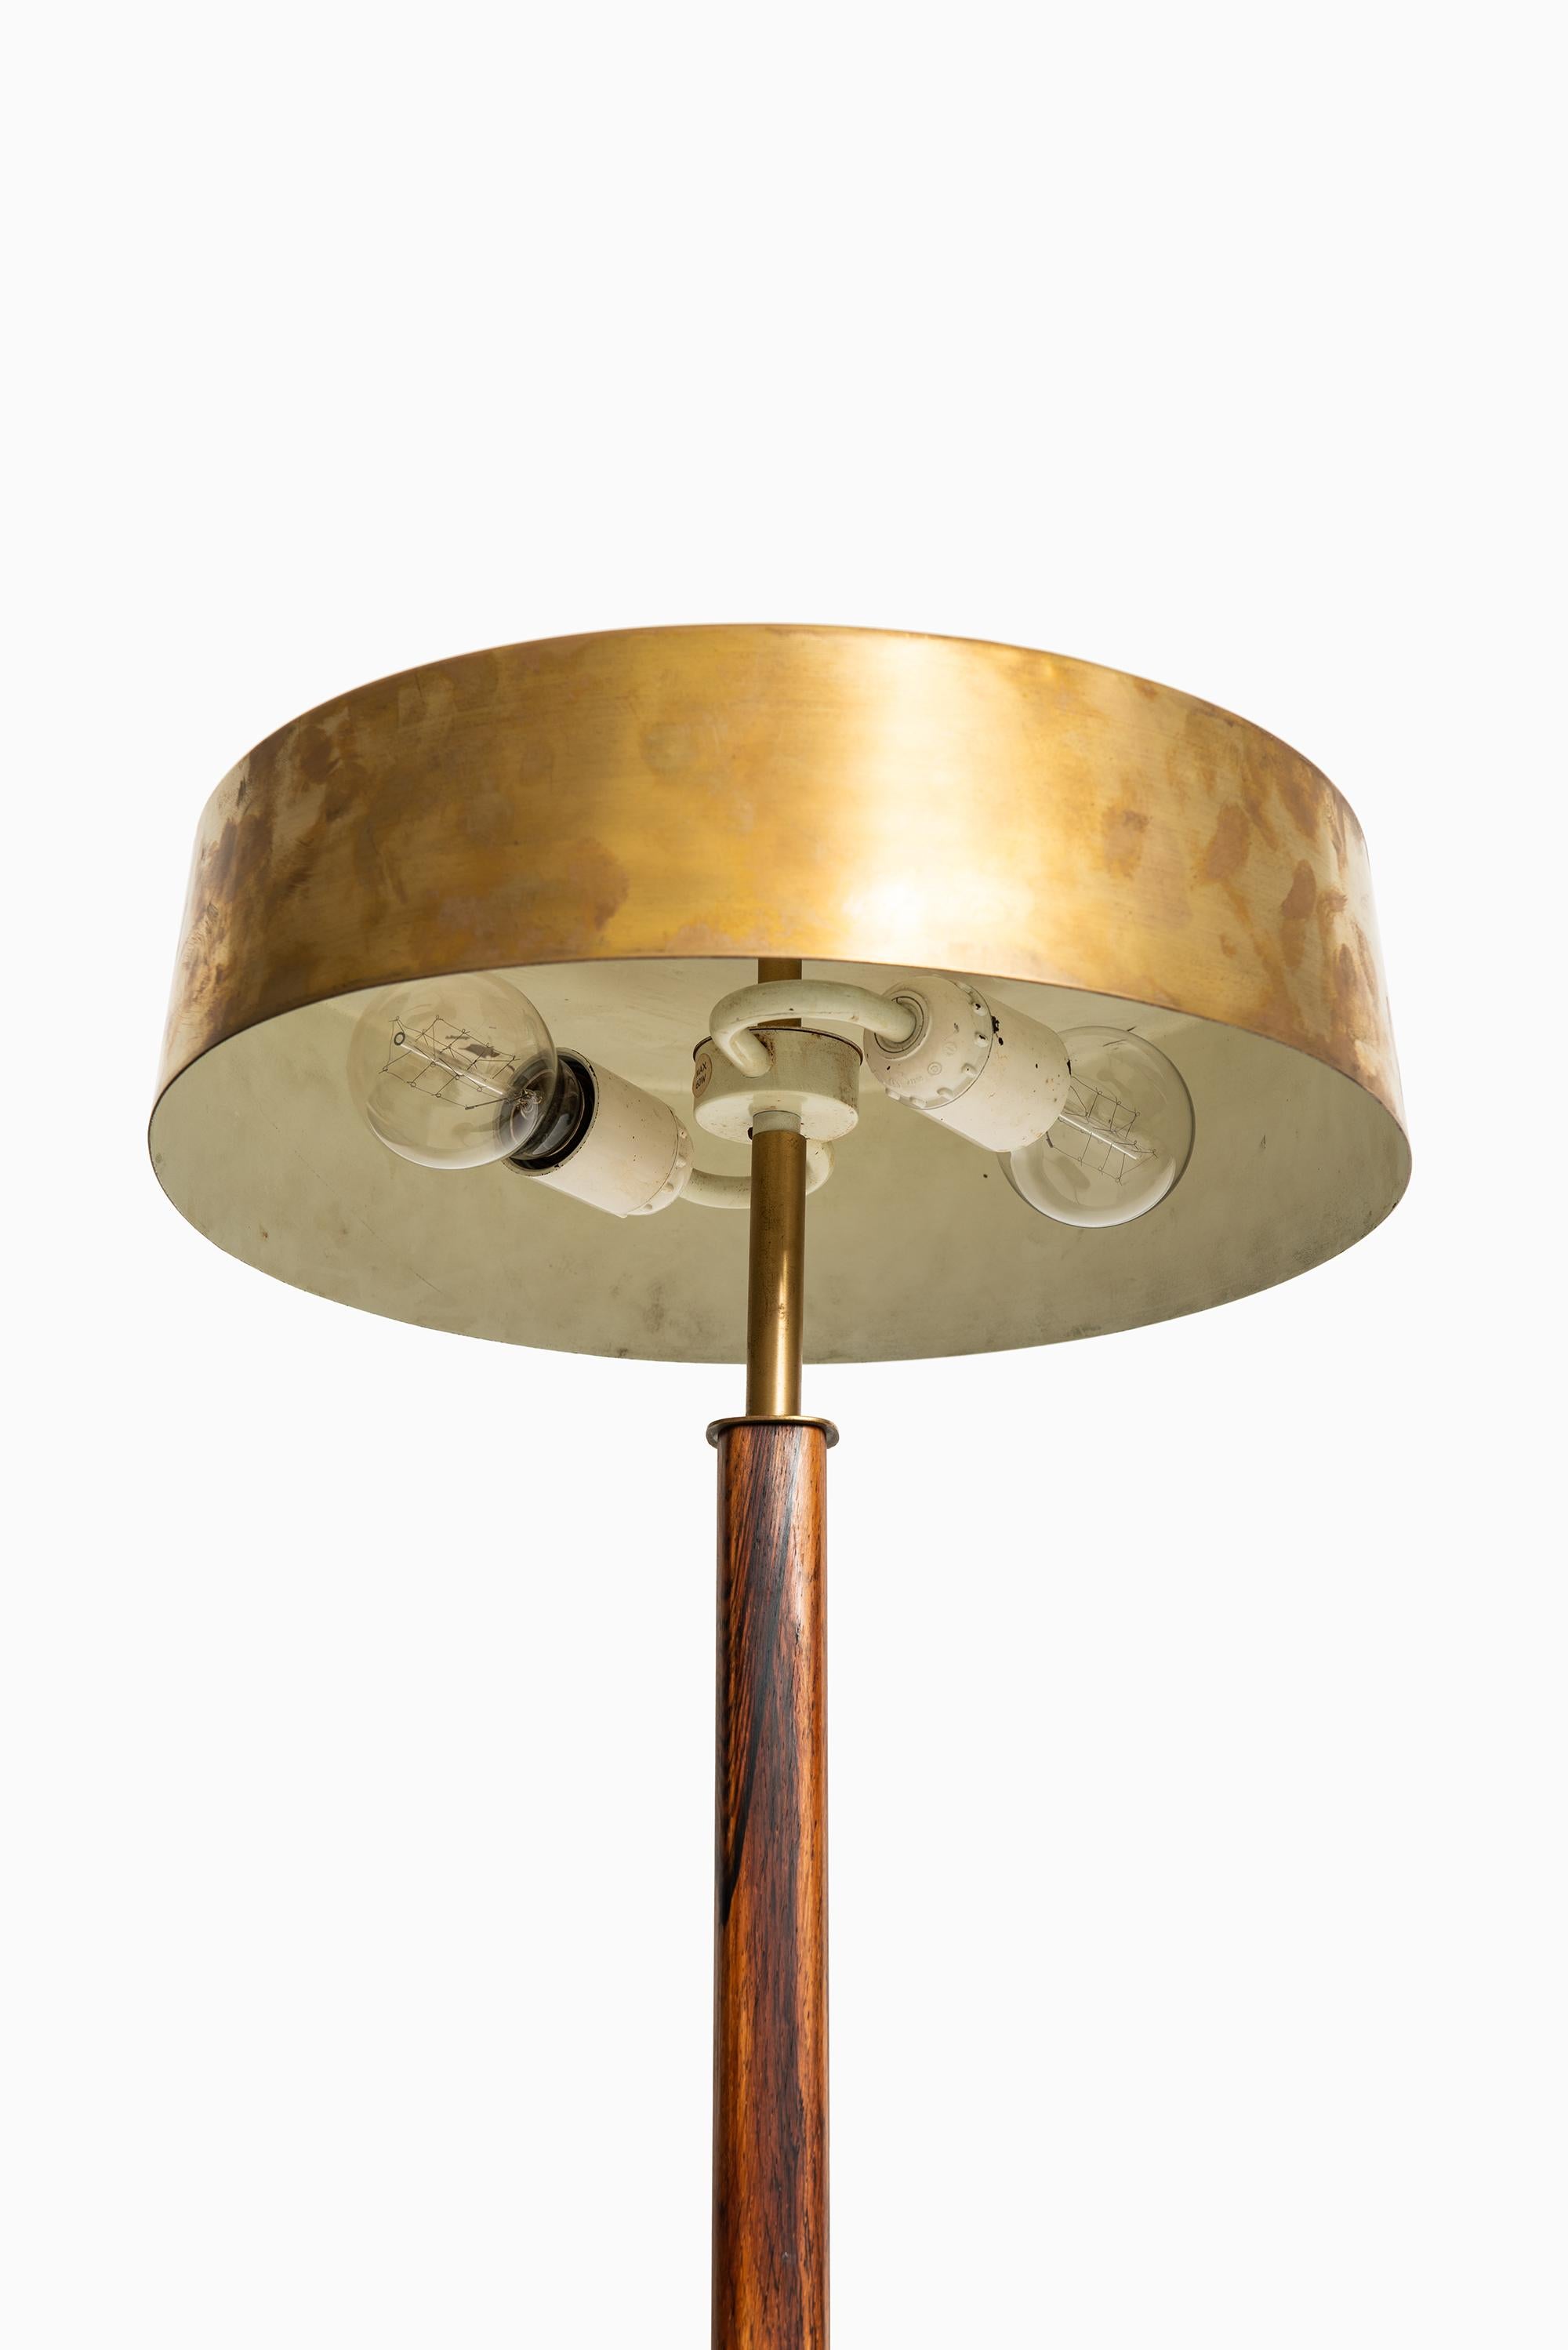 Rare table lamp. Produced by Boréns in Sweden.